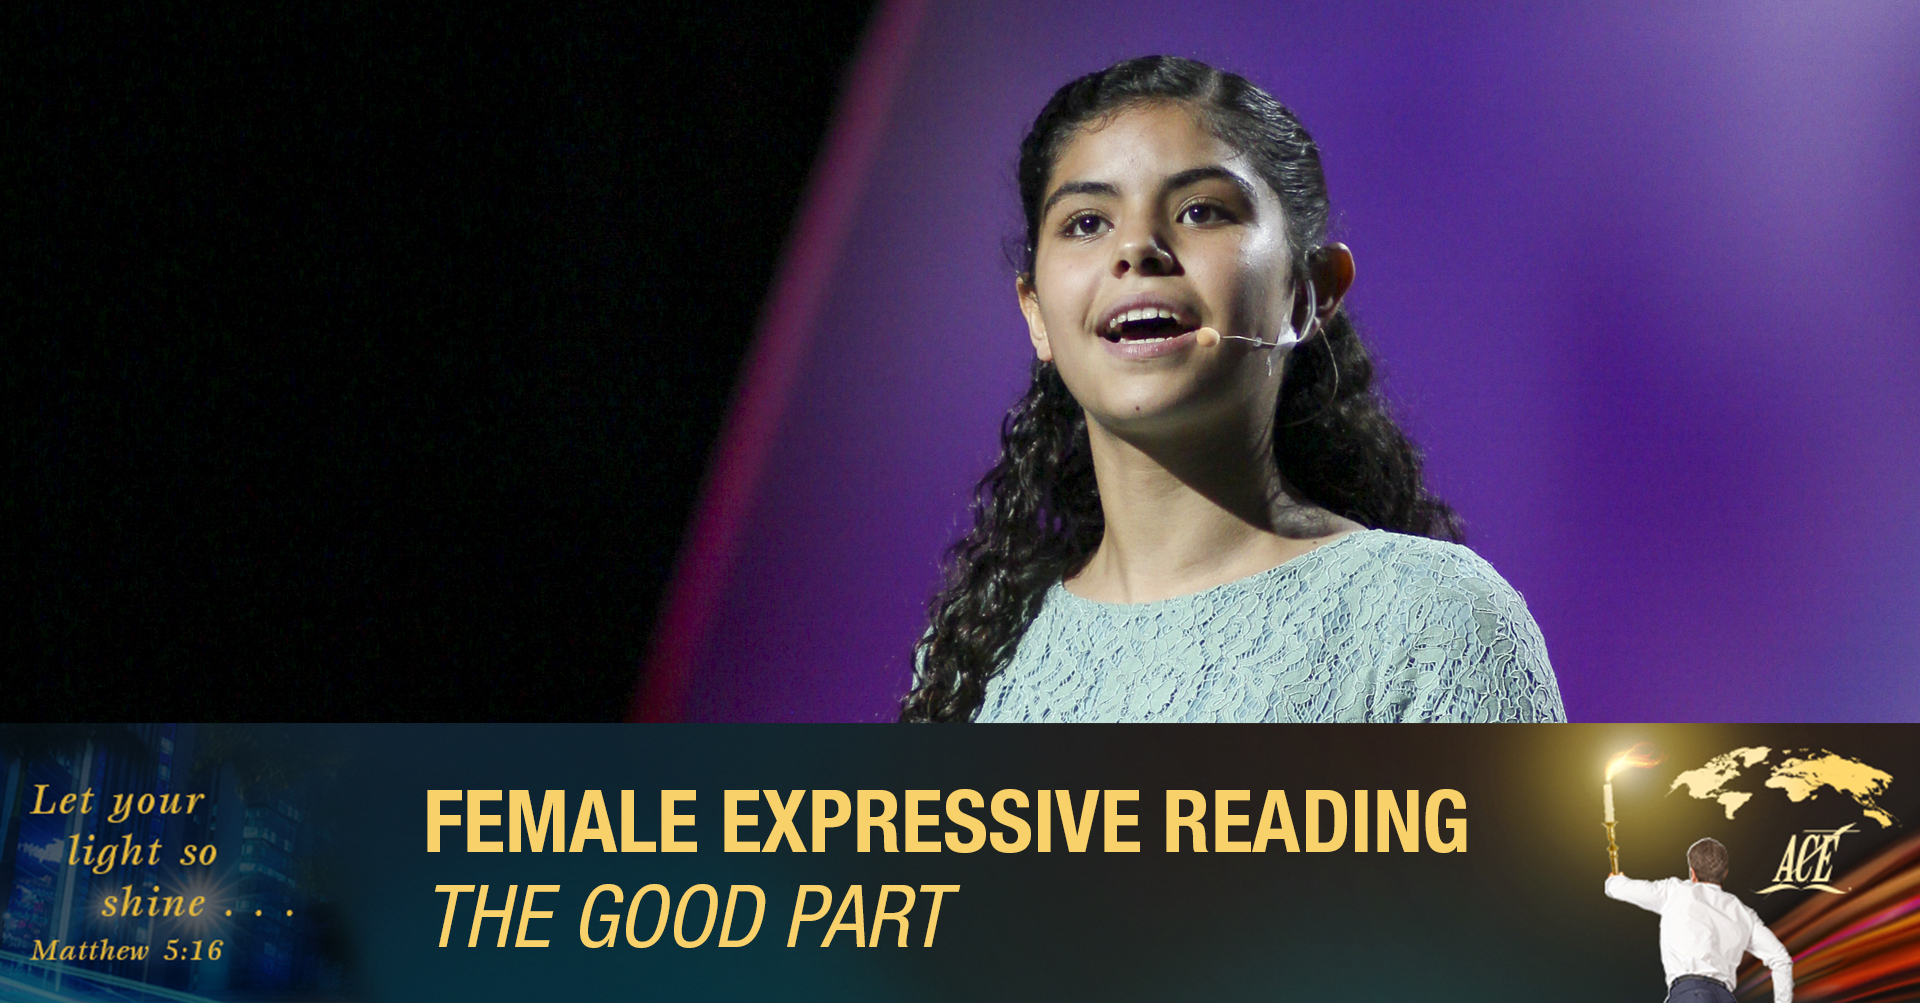 Female Expressive Reading, "The Good Part" - ISC 2019